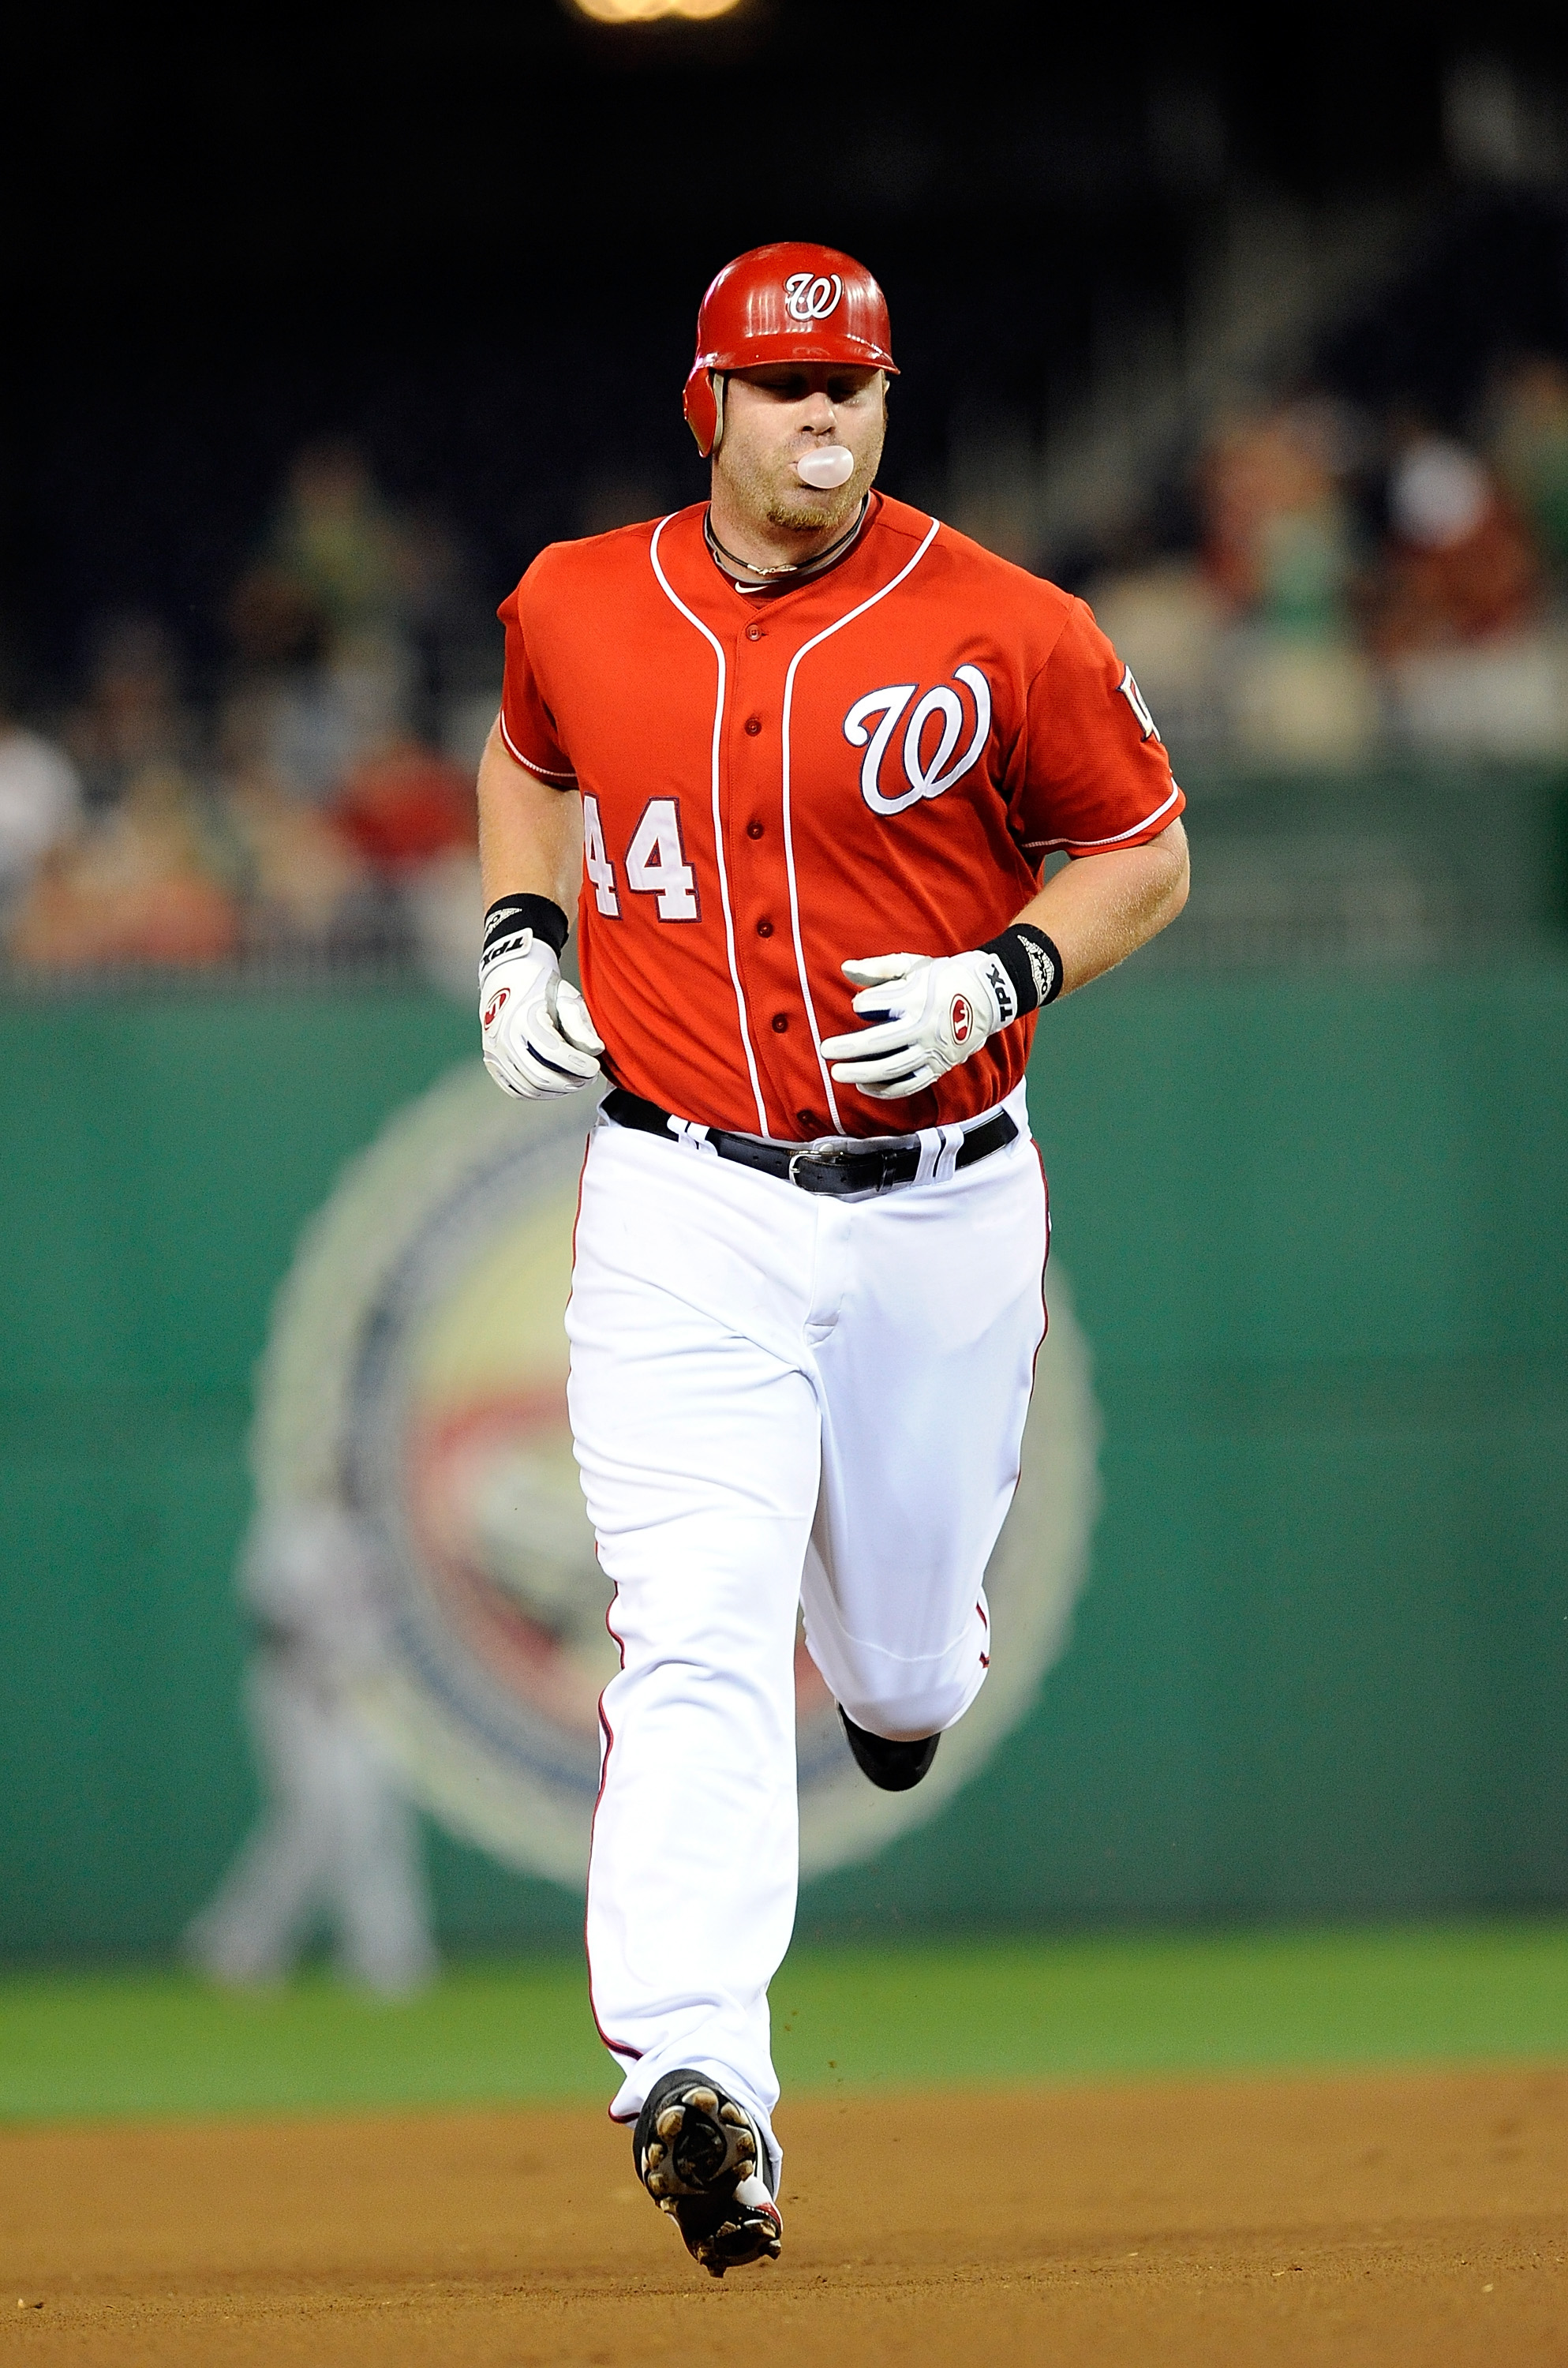 WASHINGTON - SEPTEMBER 24:  Adam Dunn #44 of the Washington Nationals rounds the bases after hitting a home run in the second inning against the Atlanta Braves at Nationals Park on September 24, 2010 in Washington, DC.  (Photo by Greg Fiume/Getty Images)